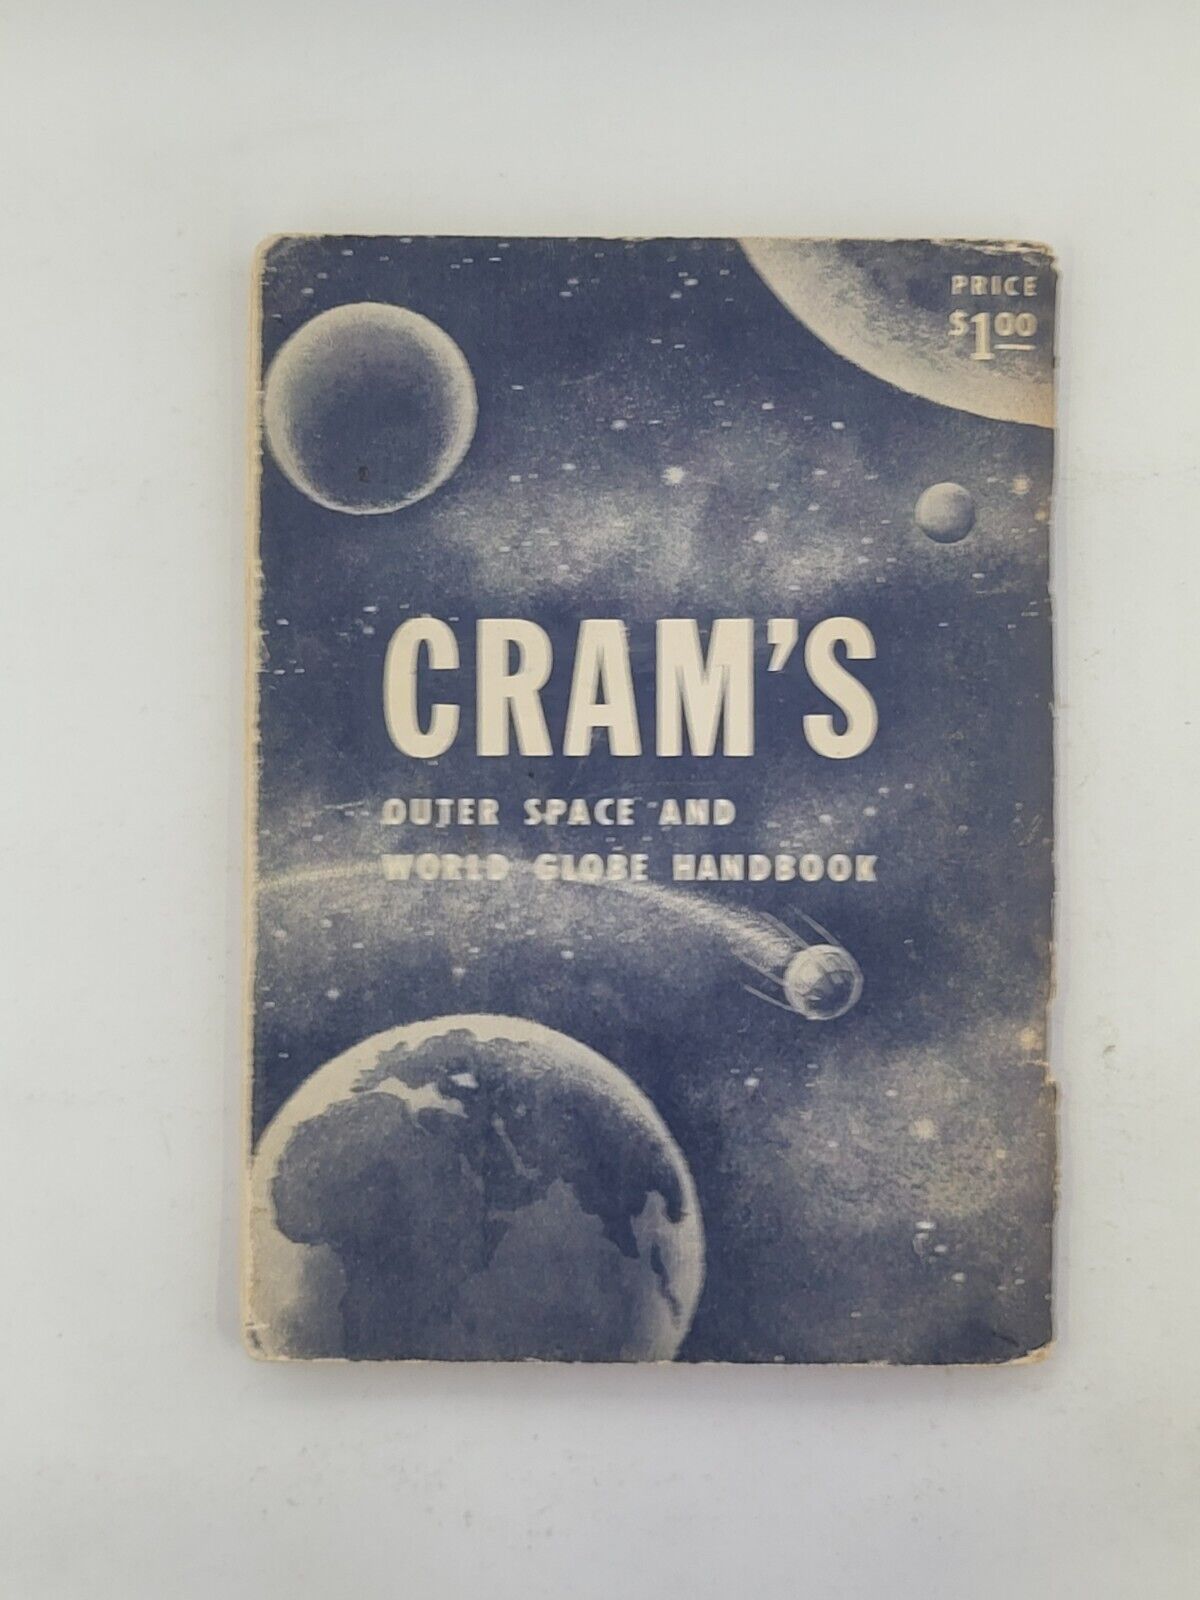 CRAM'S OUTER SPACE AND WORLD GLOBE HANDBOOK (c) 1959- 5x7 - 64 pages